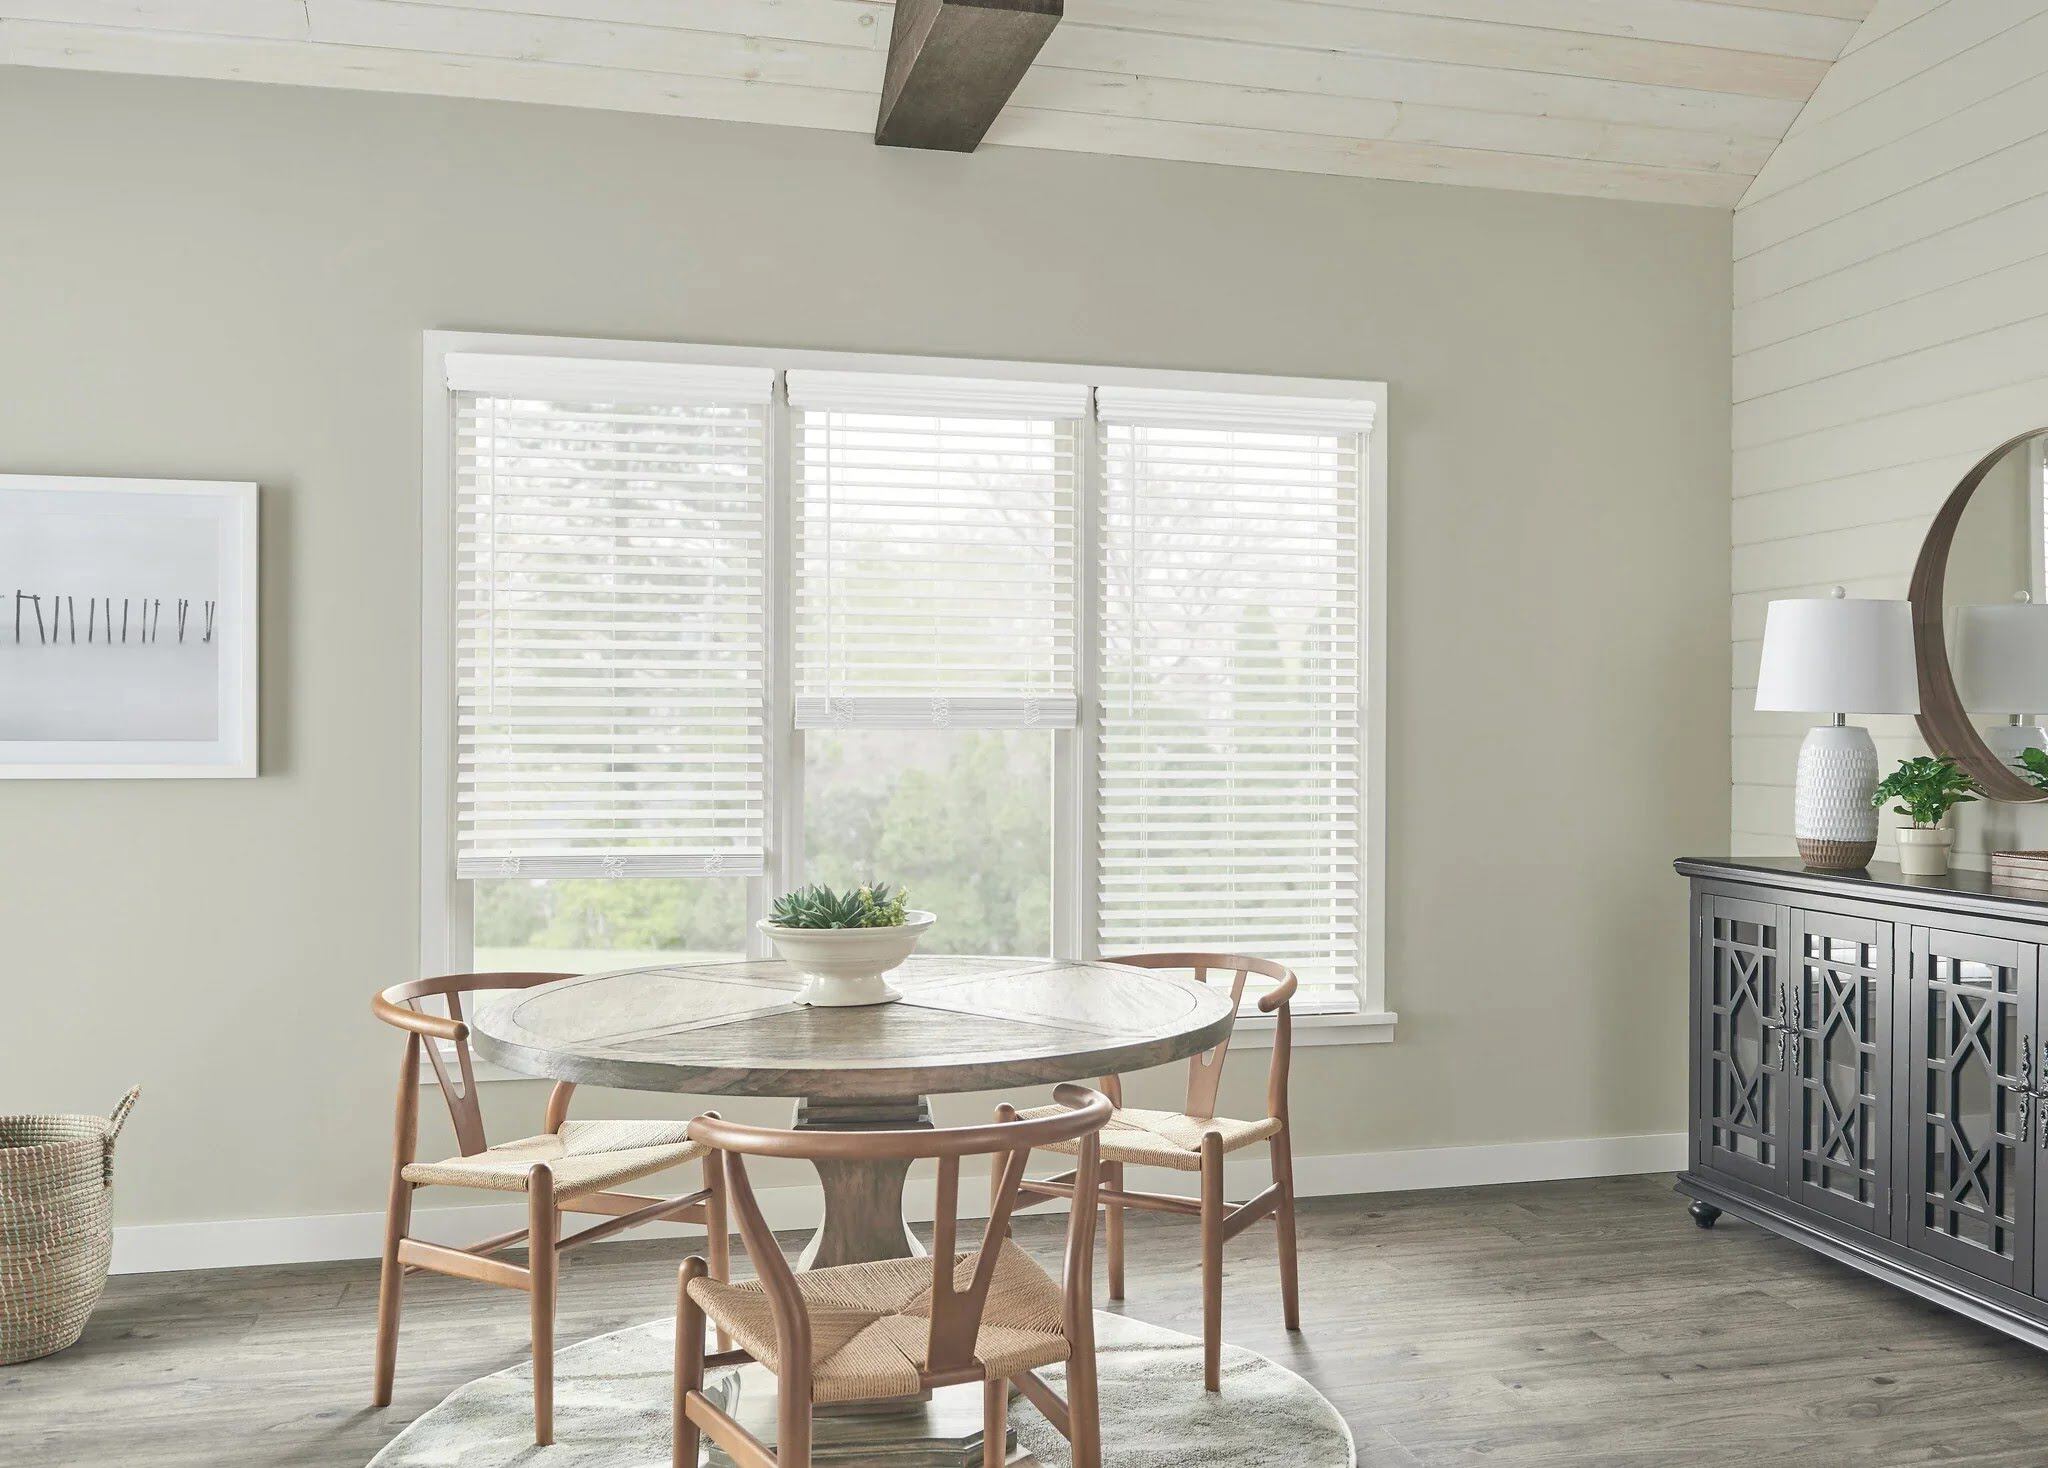 How To Lower Window Blinds Without A Cord